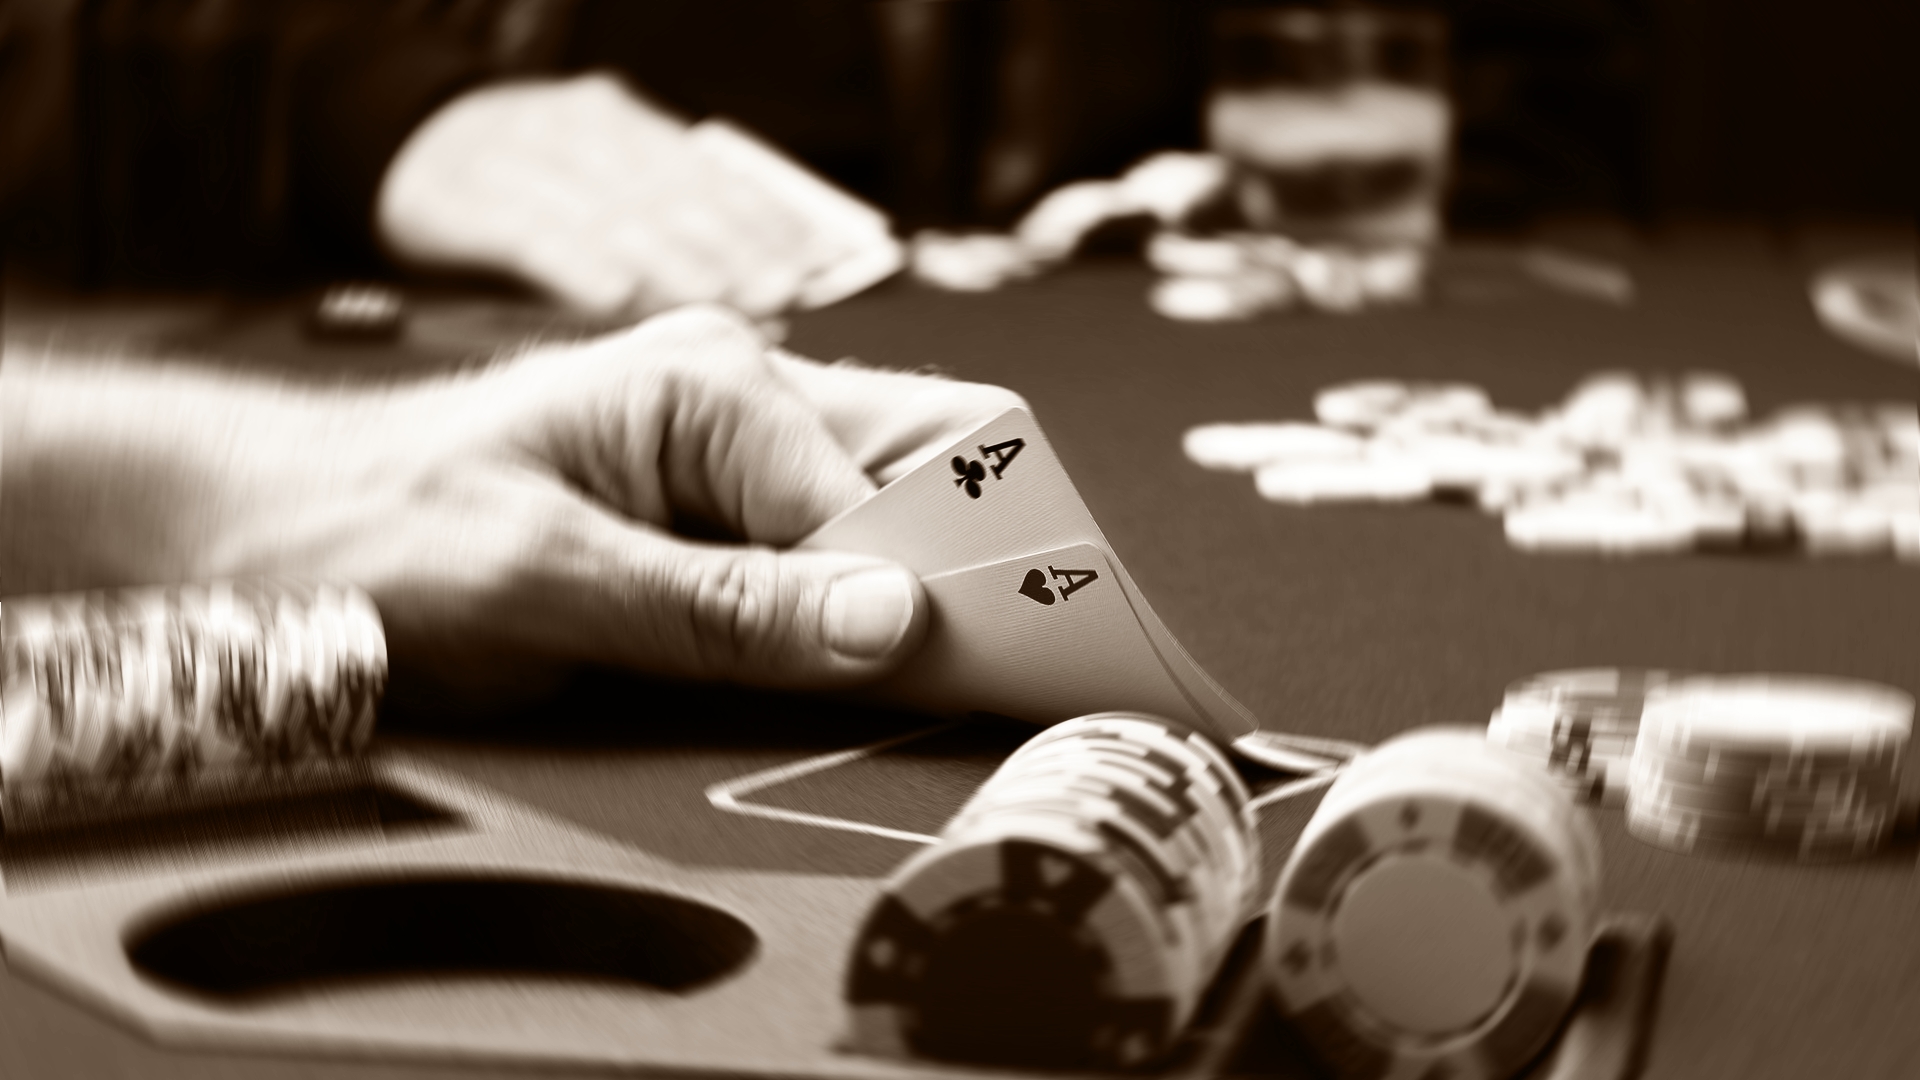 Poker Wallpaper Collection 43